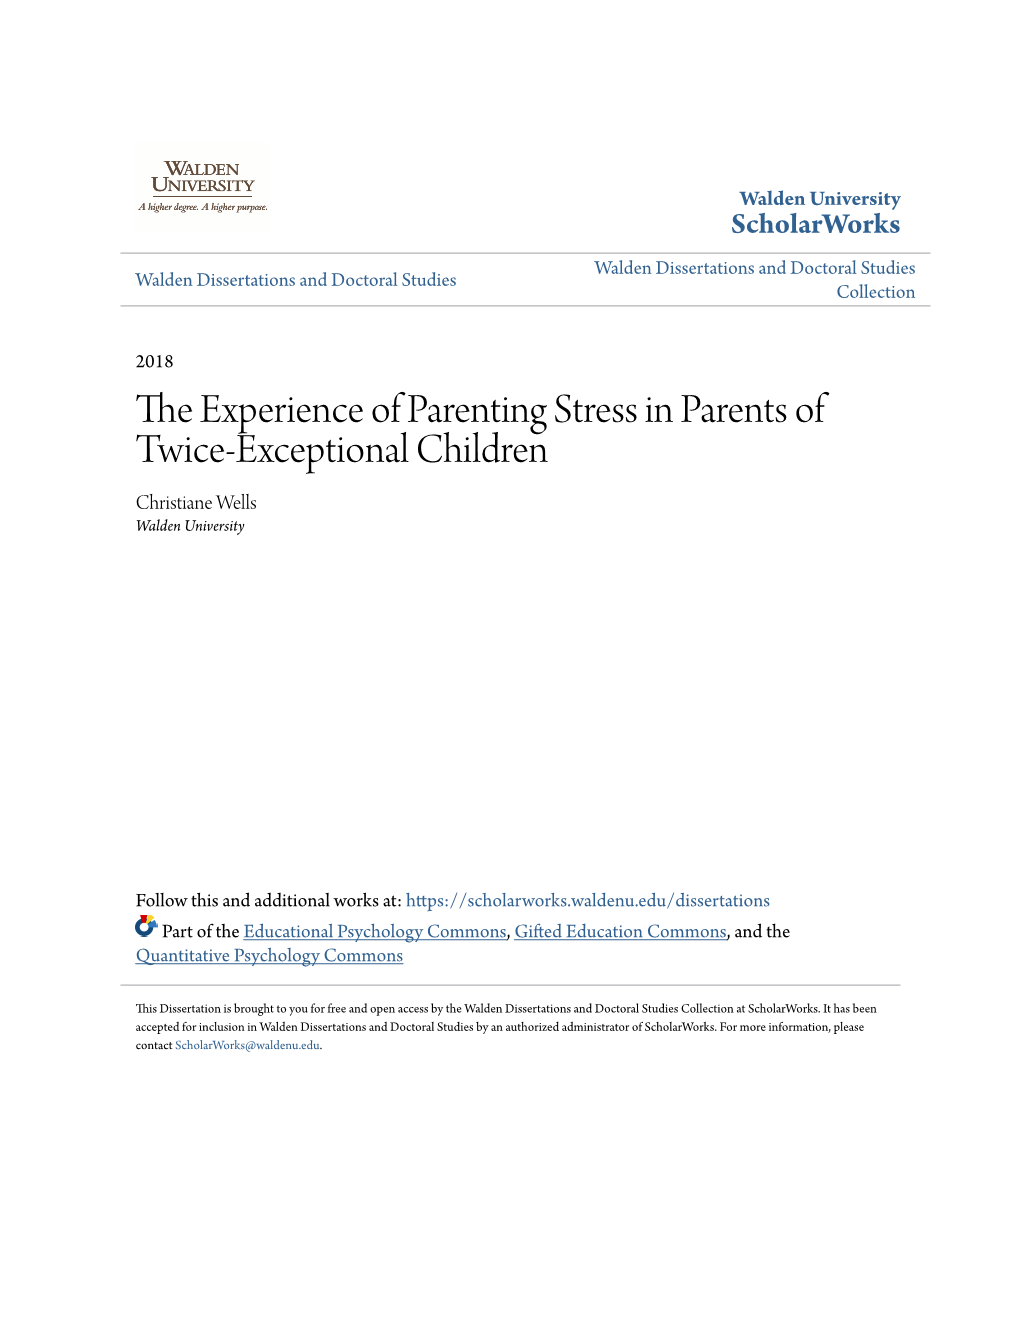 The Experience of Parenting Stress in Parents of Twice-Exceptional Children Christiane Wells Walden University